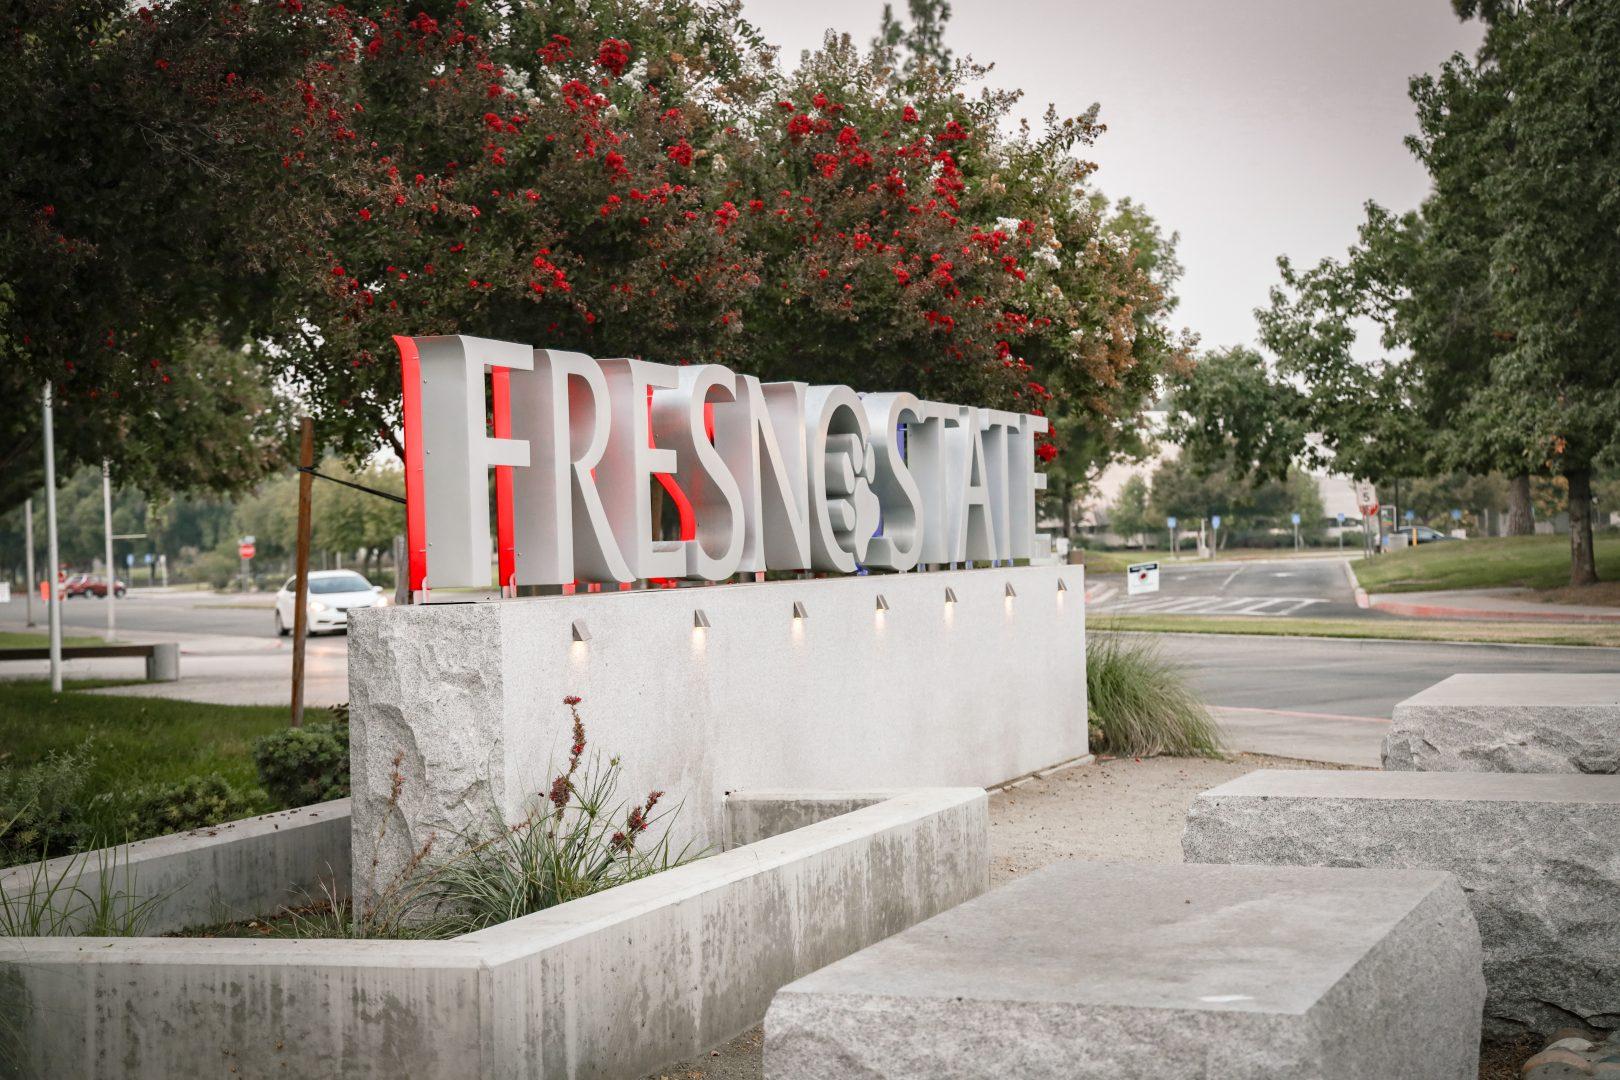 Fresno+State+estimates+%2424.7+million+in+emergency+financial+assistance+for+students.+%28+